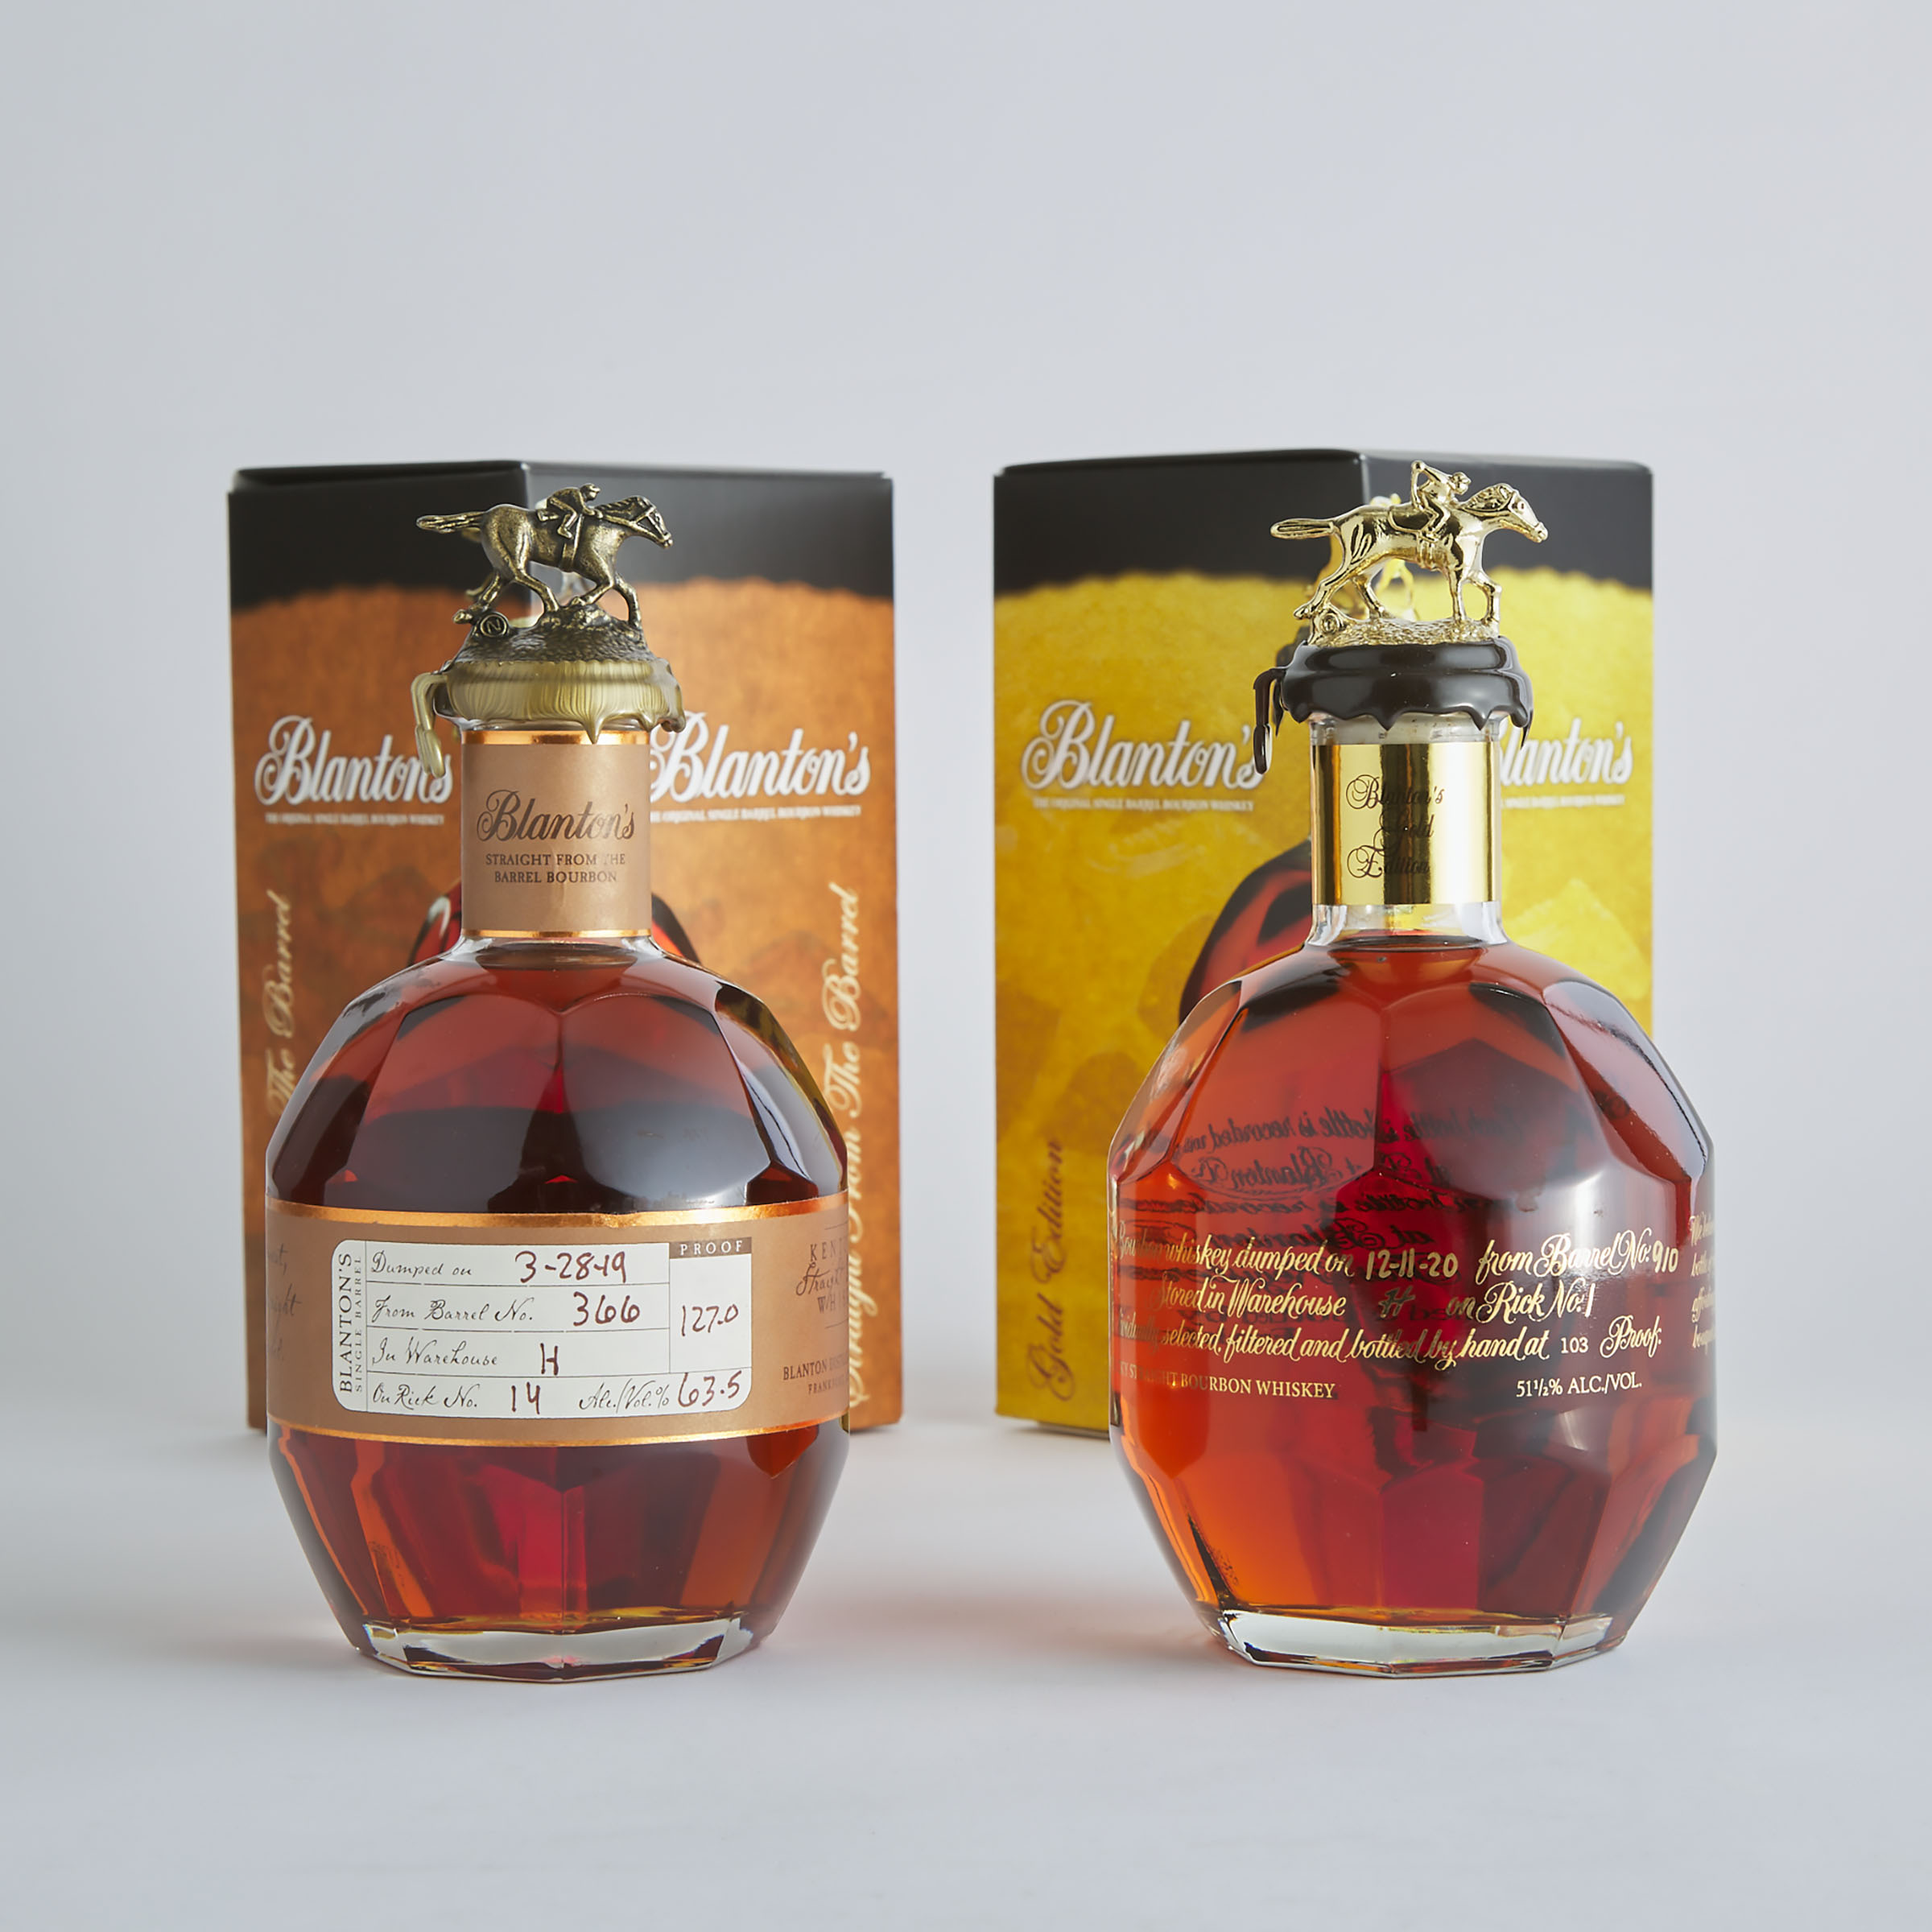 BLANTON'S GOLD EDITION KENTUCKY STRAIGHT BOURBON WHISKEY (ONE 750 ML)
BLANTON'S STRAIGHT FROM THE BARREL BOURBON WHISKEY (ONE 70 CL)